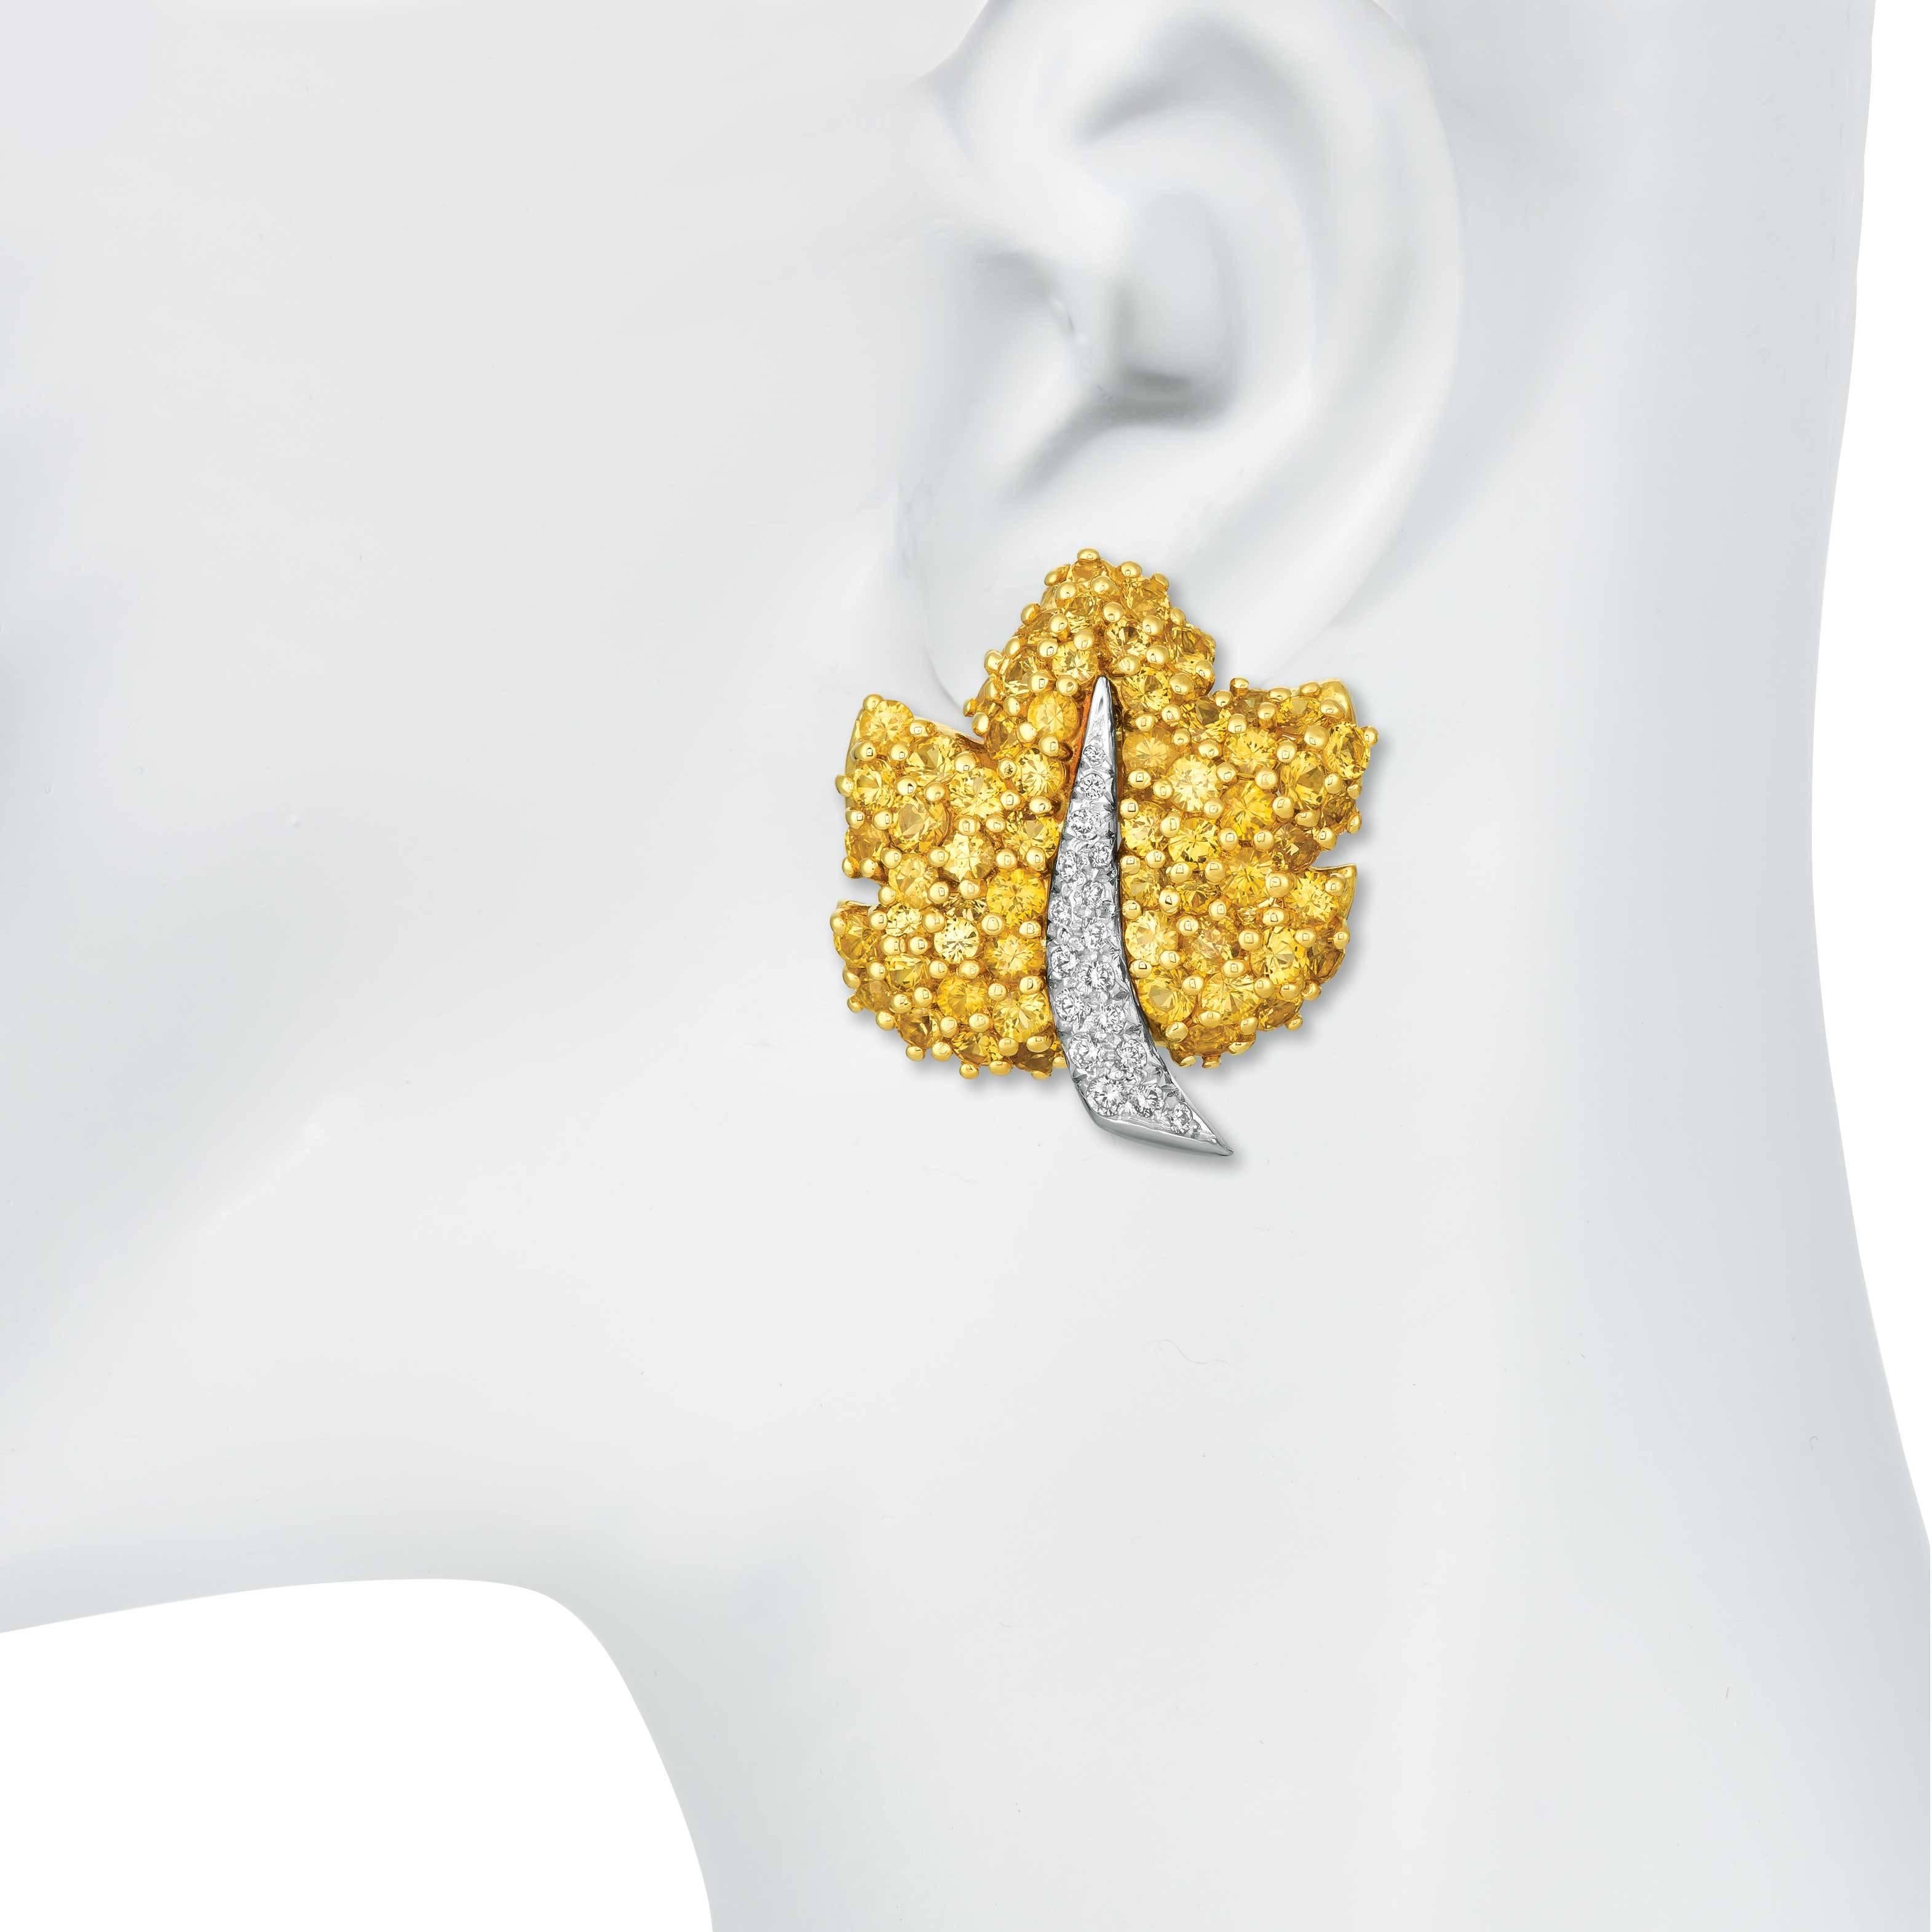 18 karat gold leaves are set in Royal pave with 8.75 carats bright Yellow Sapphires inspiring autumn. The center of the leaves are Platinum set with .50 carats of diamonds total weight.